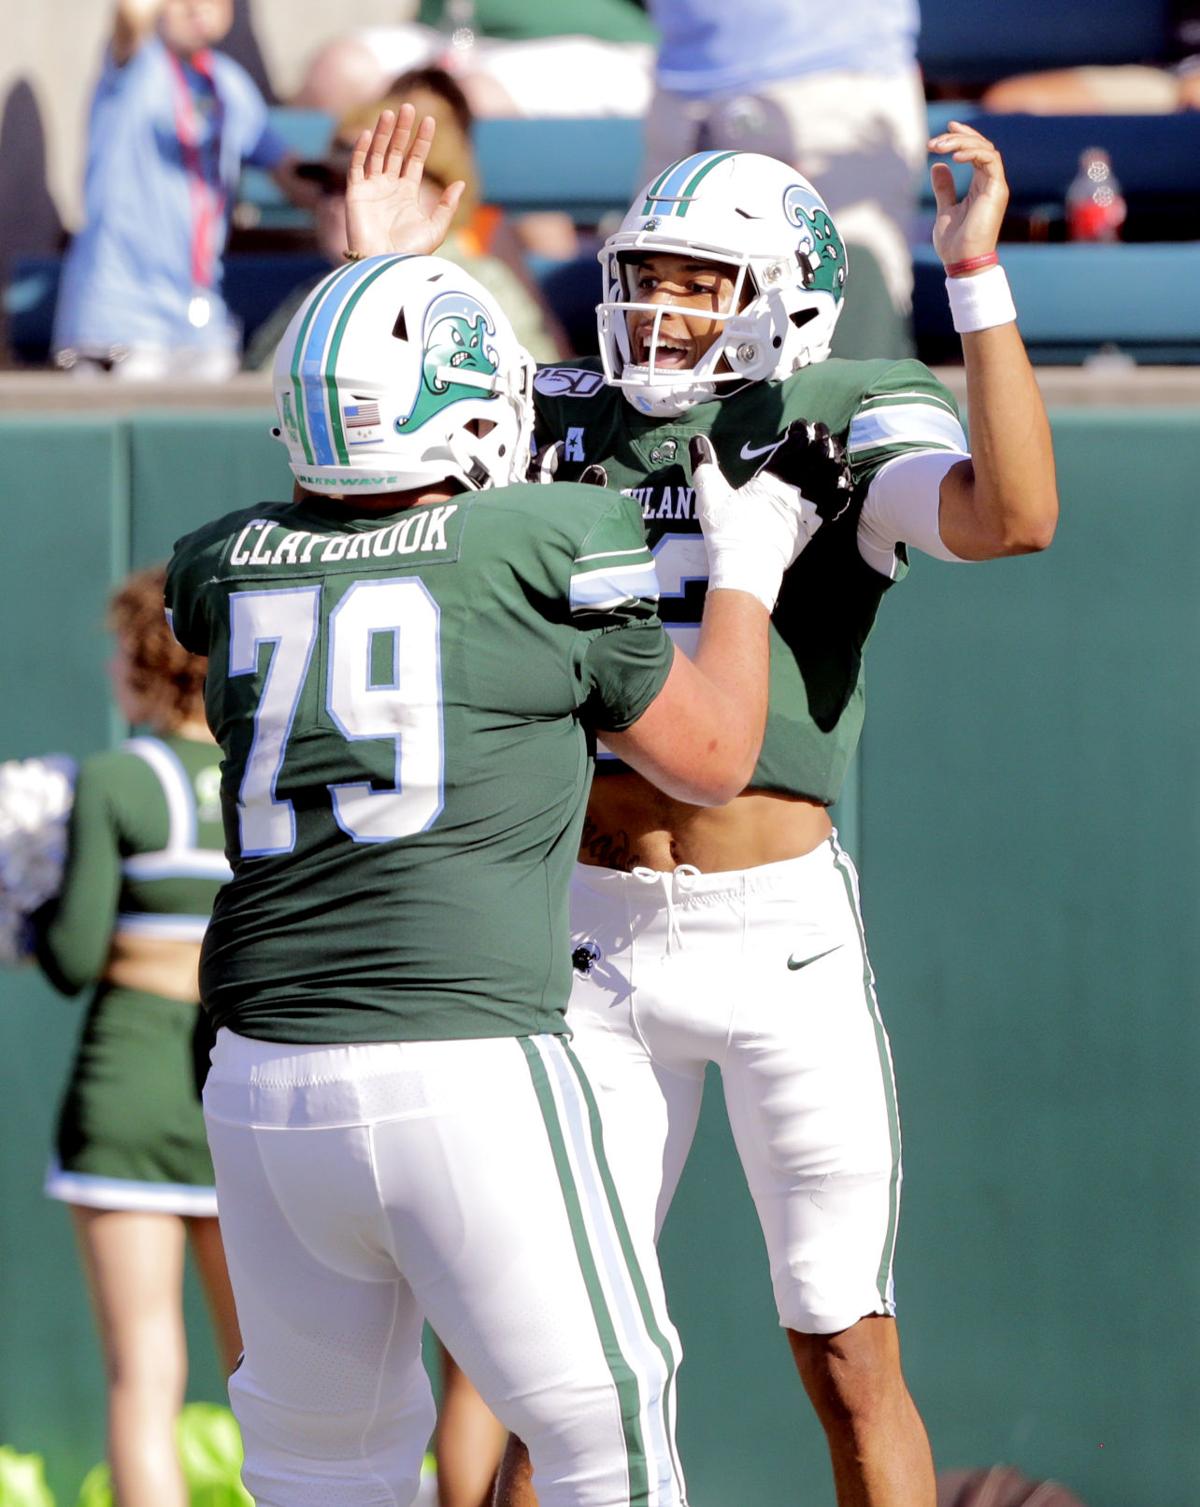 On verge of top 25 ranking, Tulane football team just worried about